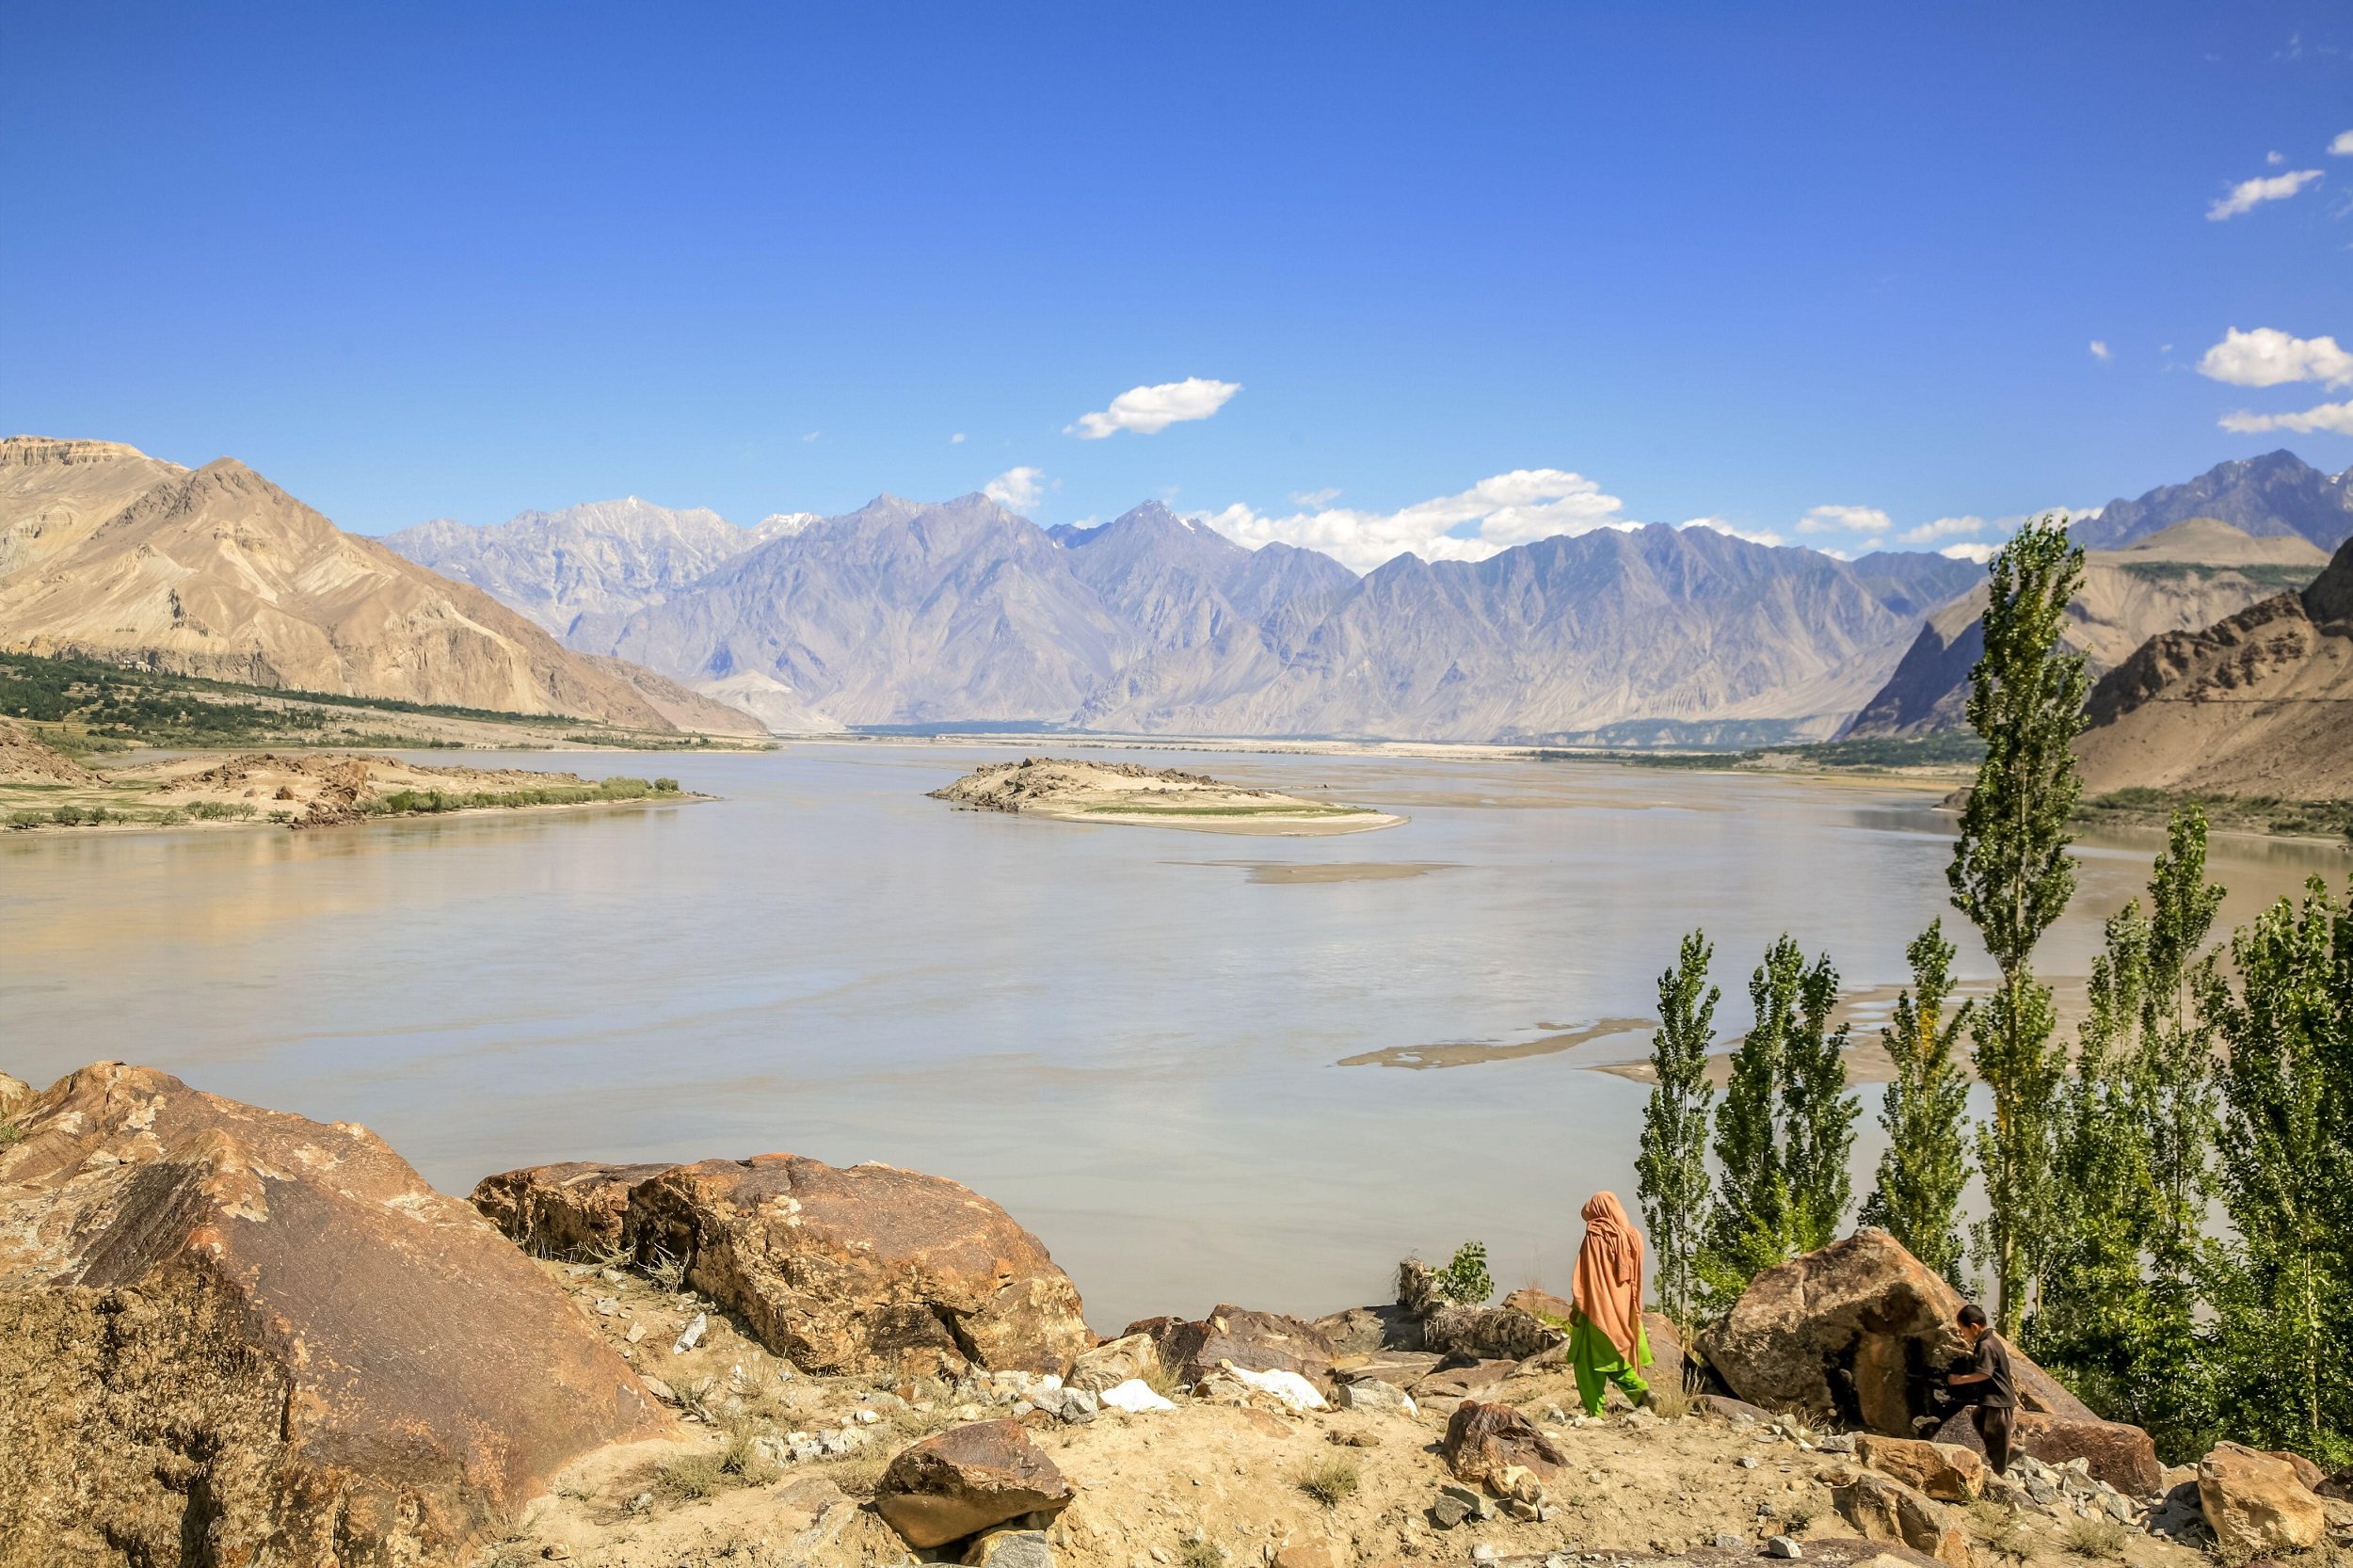 <p>A solitary woman, wearing a traditional headscarf, walks towards the Indus river near Skardu in northern Pakistan (Image: Alamy)</p>